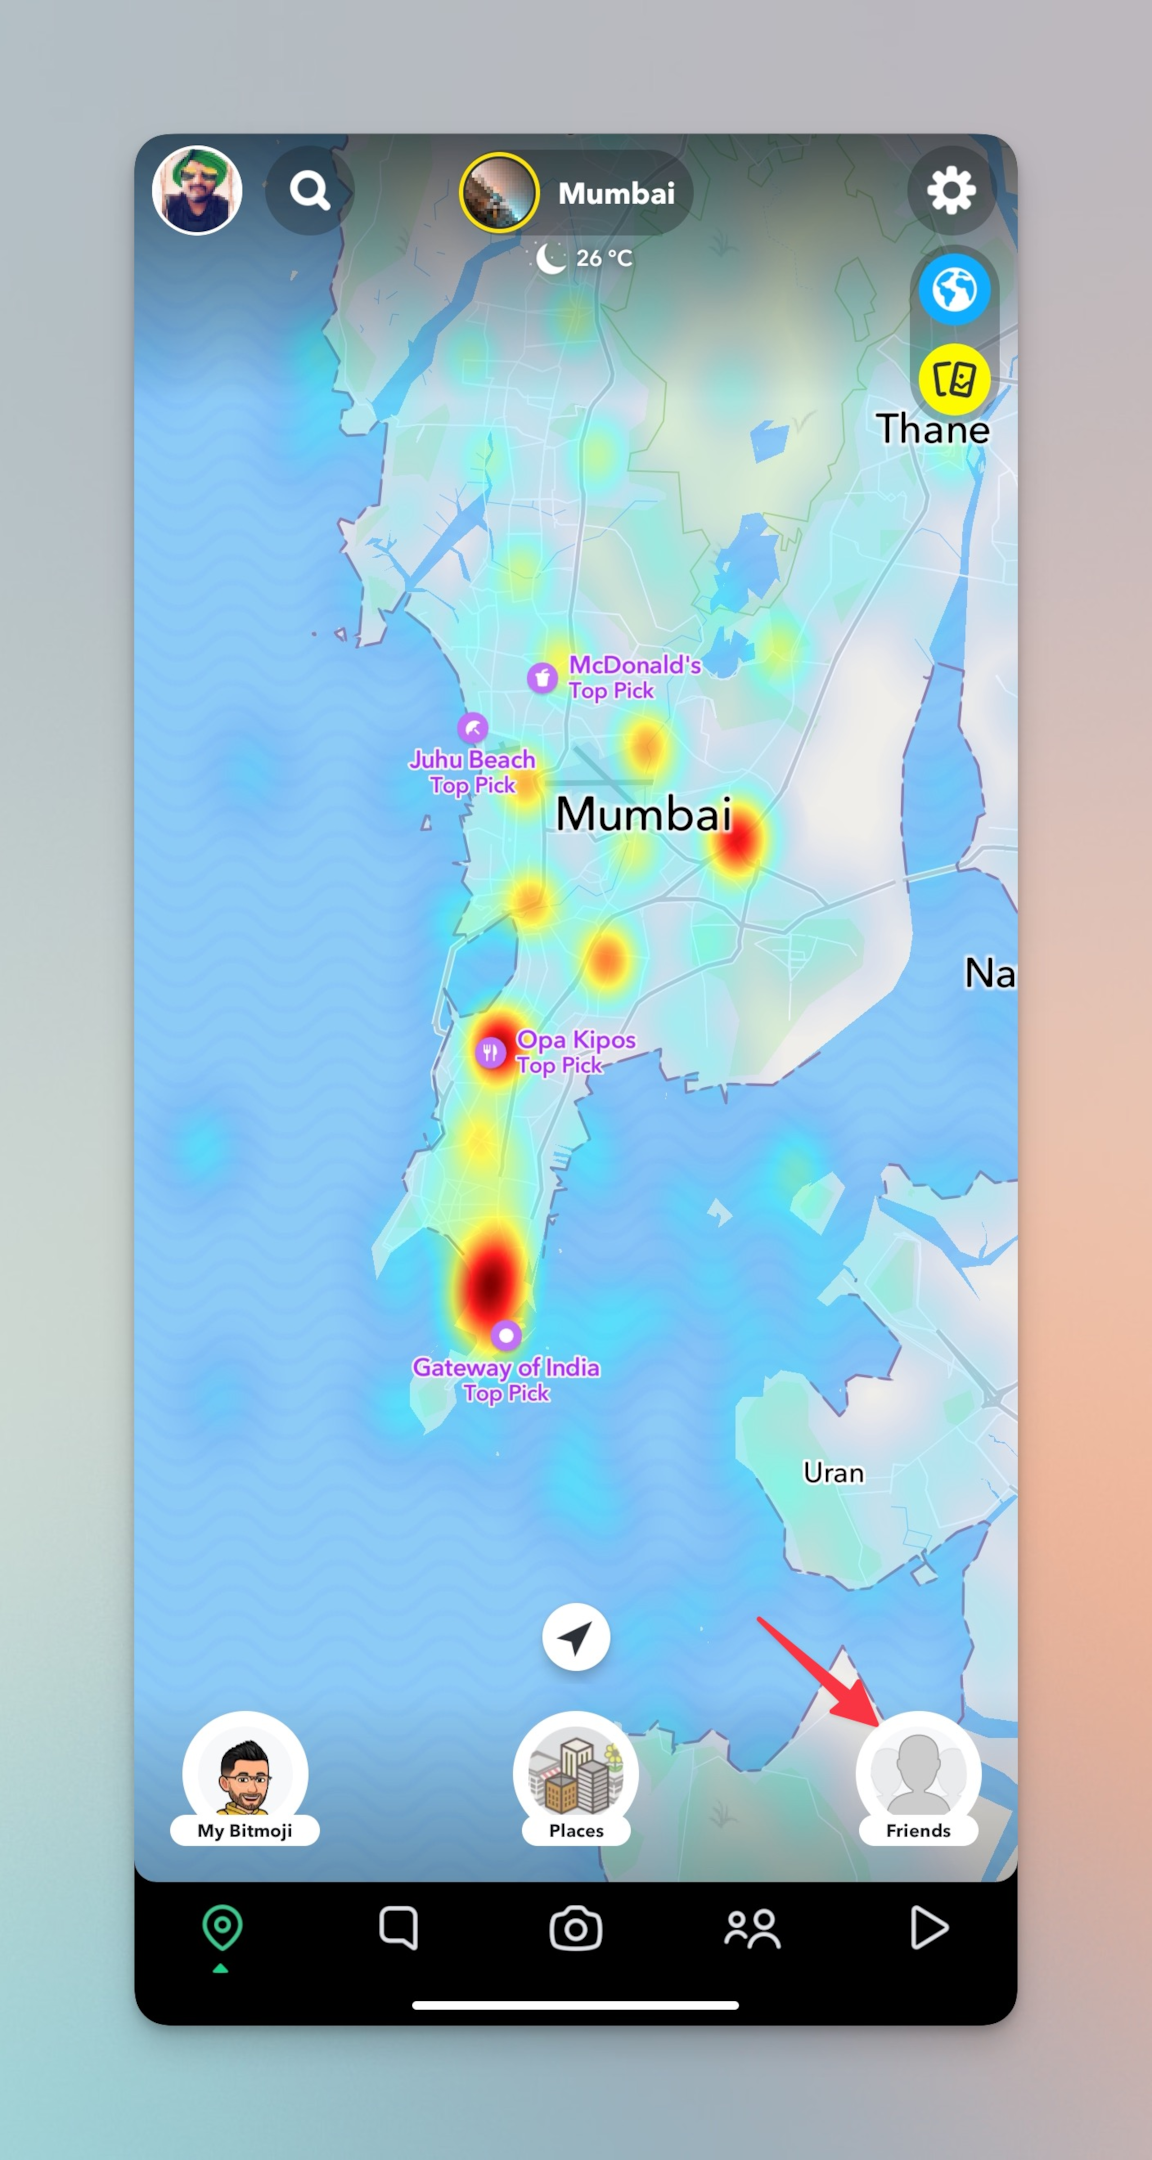 Remote.tools shows the snap map pointing to the friends tab to view stories of friends and random people on Snapchat